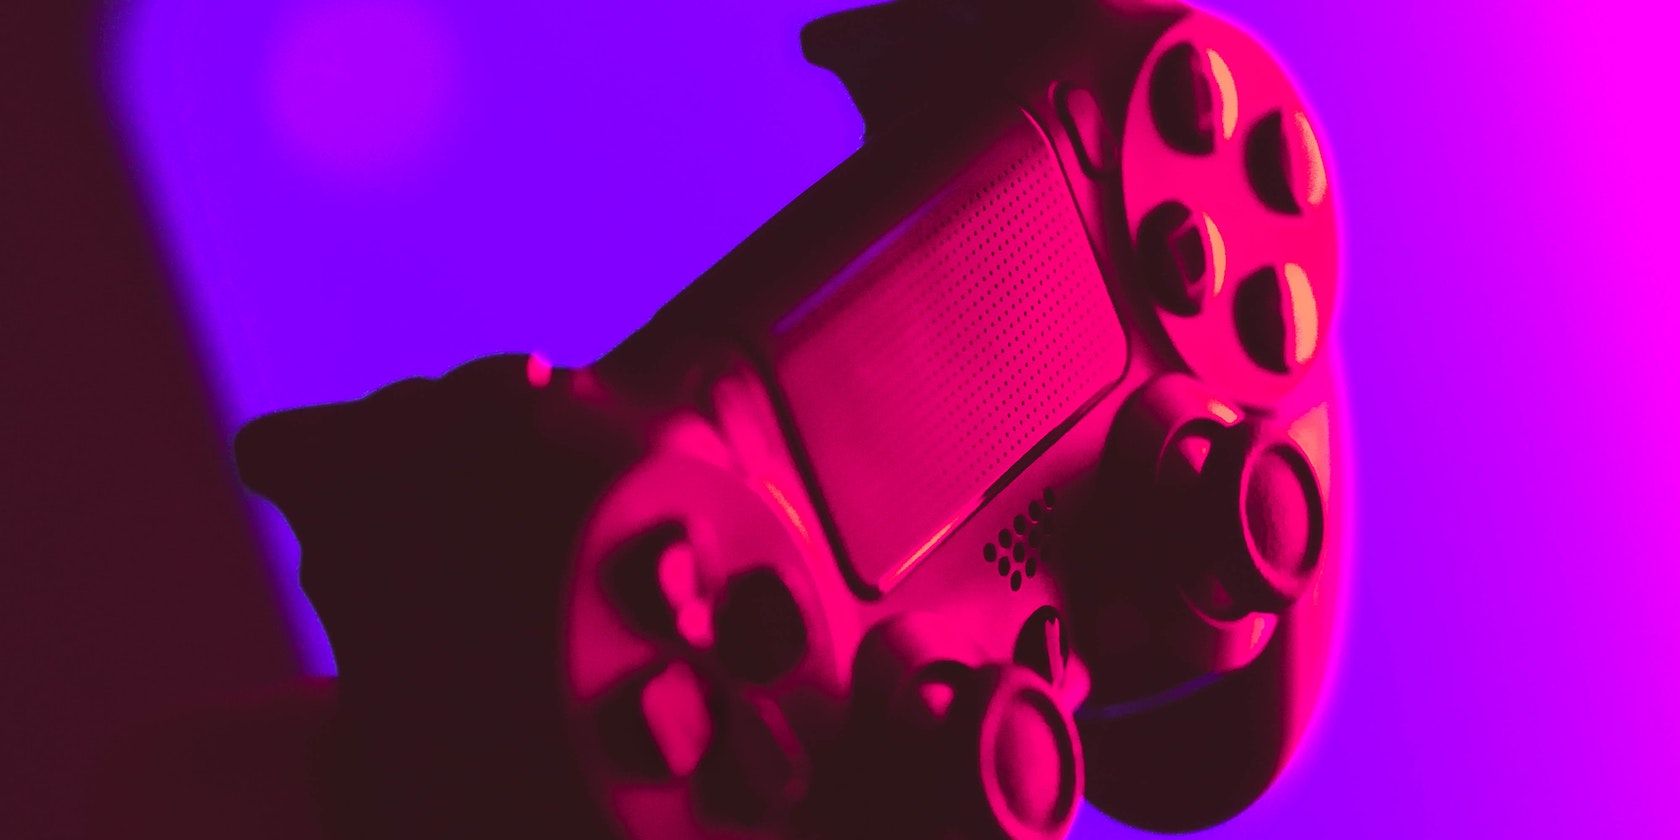 a PS4 controller in a purple and red light